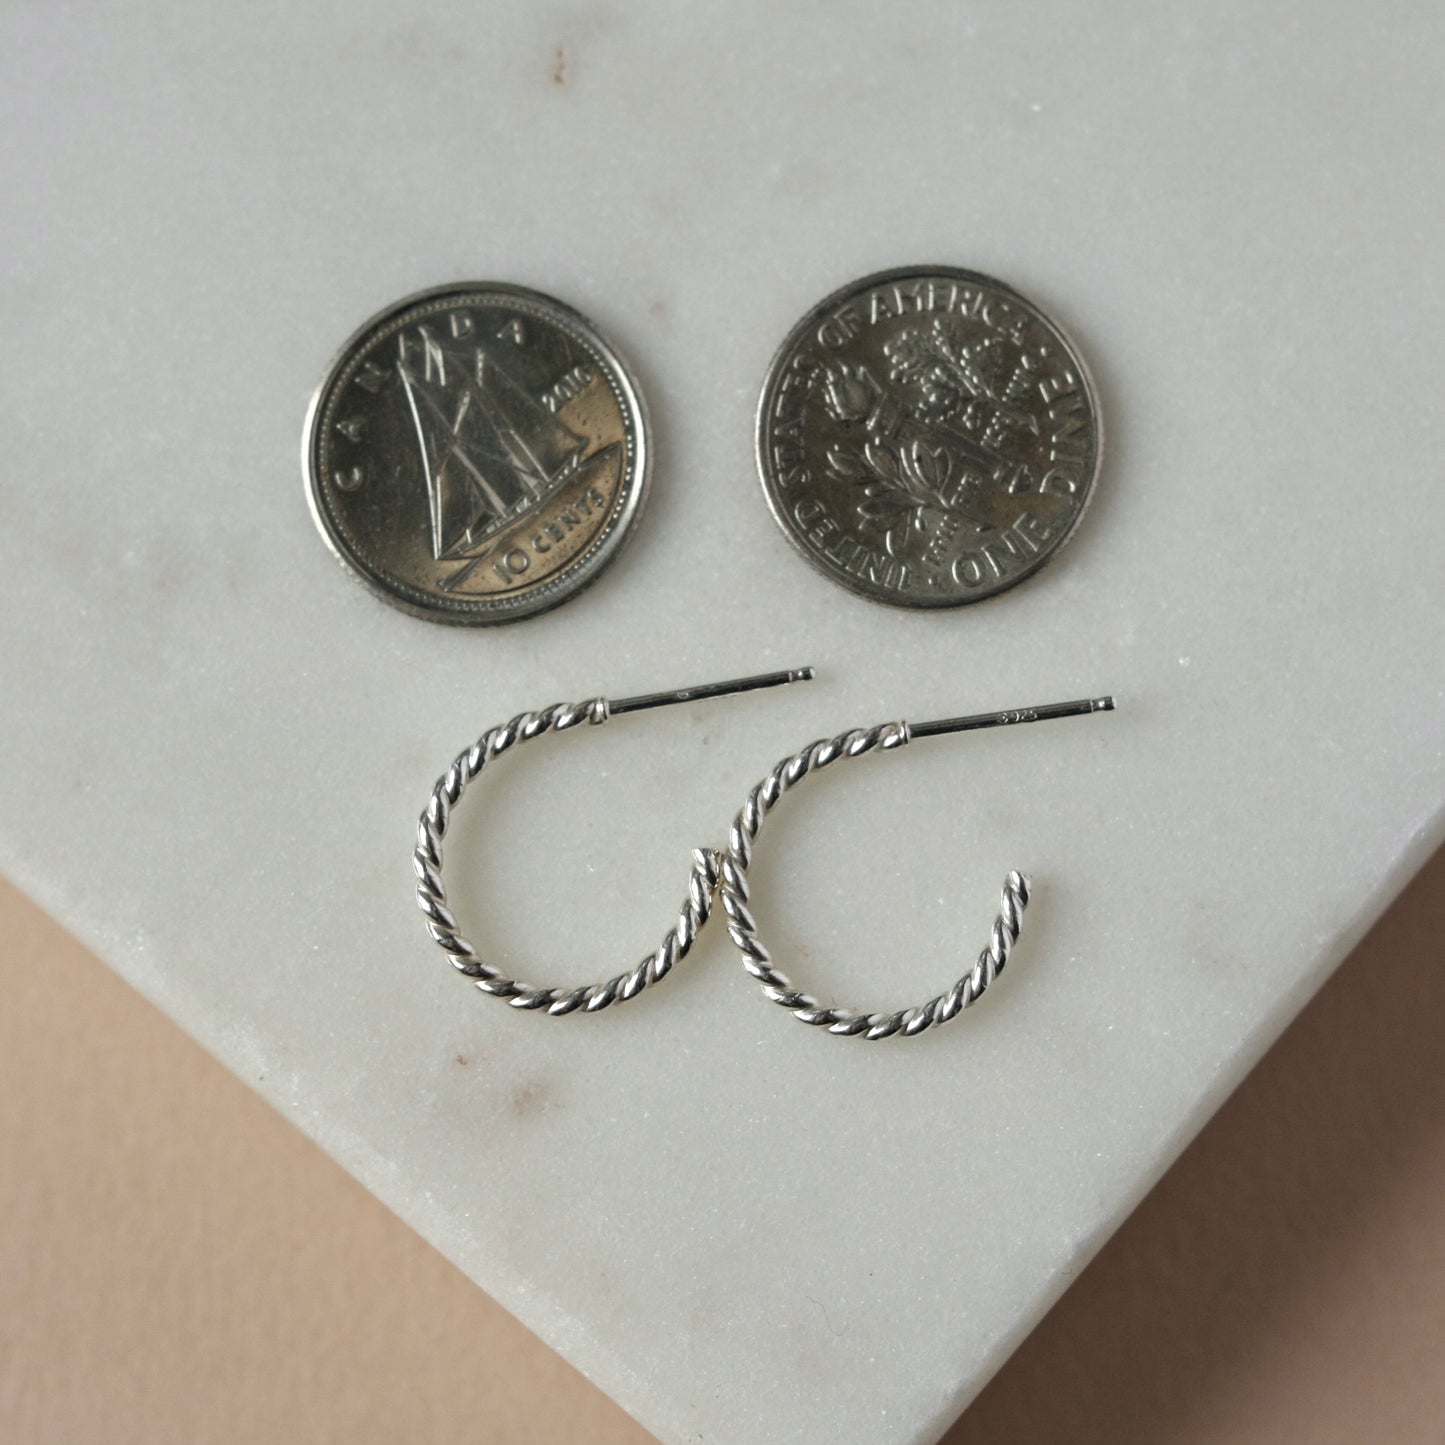 Small Everyday Twisted Sterling Silver Hoop Earrings